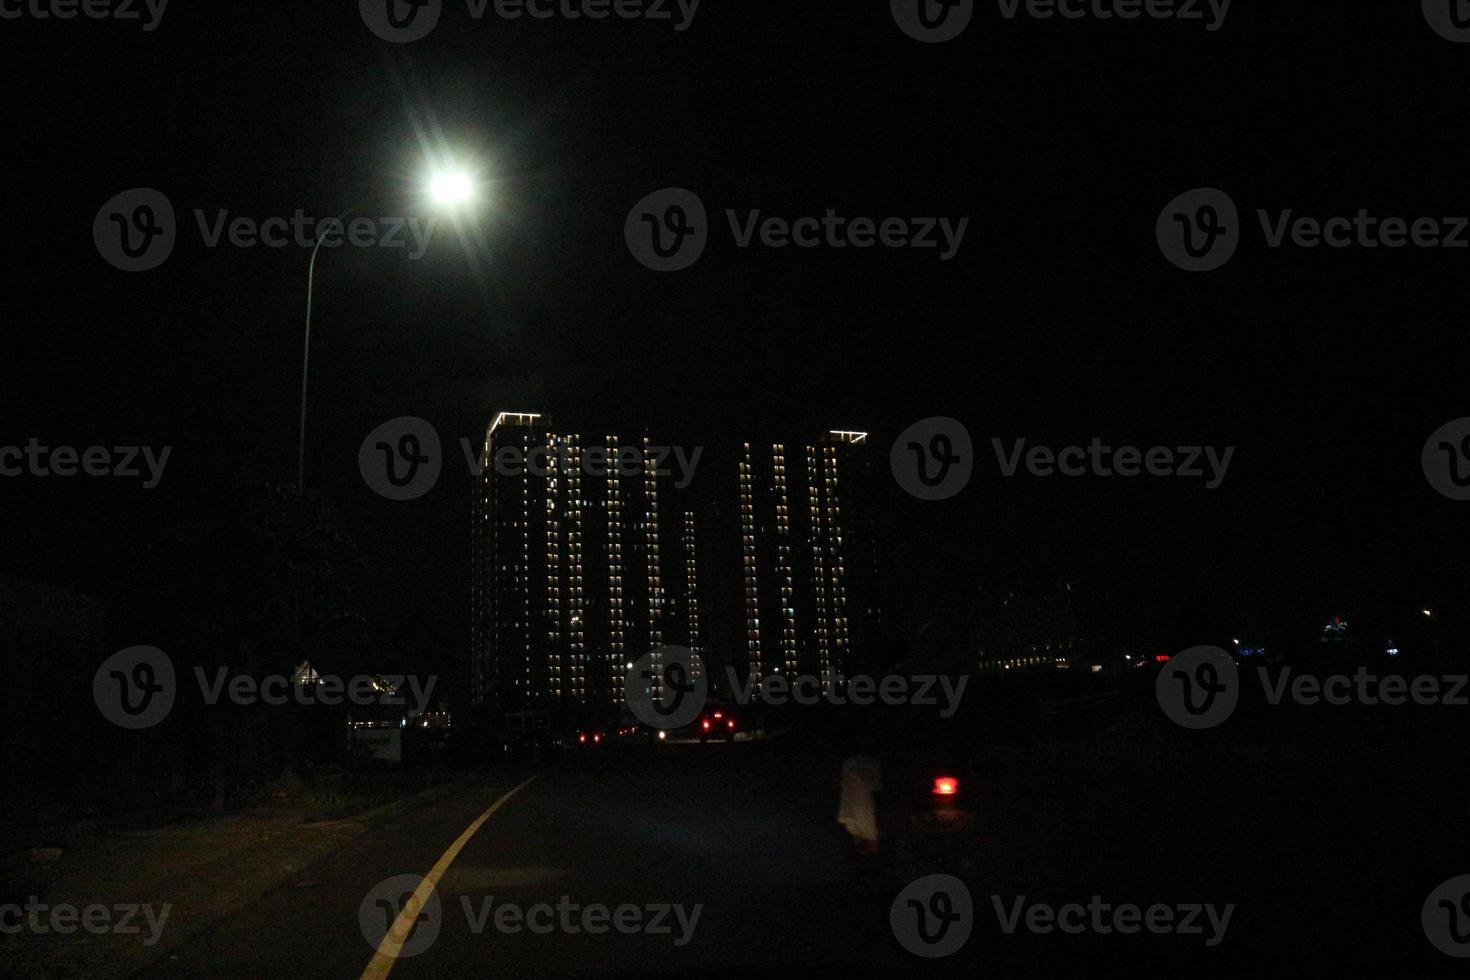 Conditions at night where you can see neatly arranged light rays coming from an apartment photo